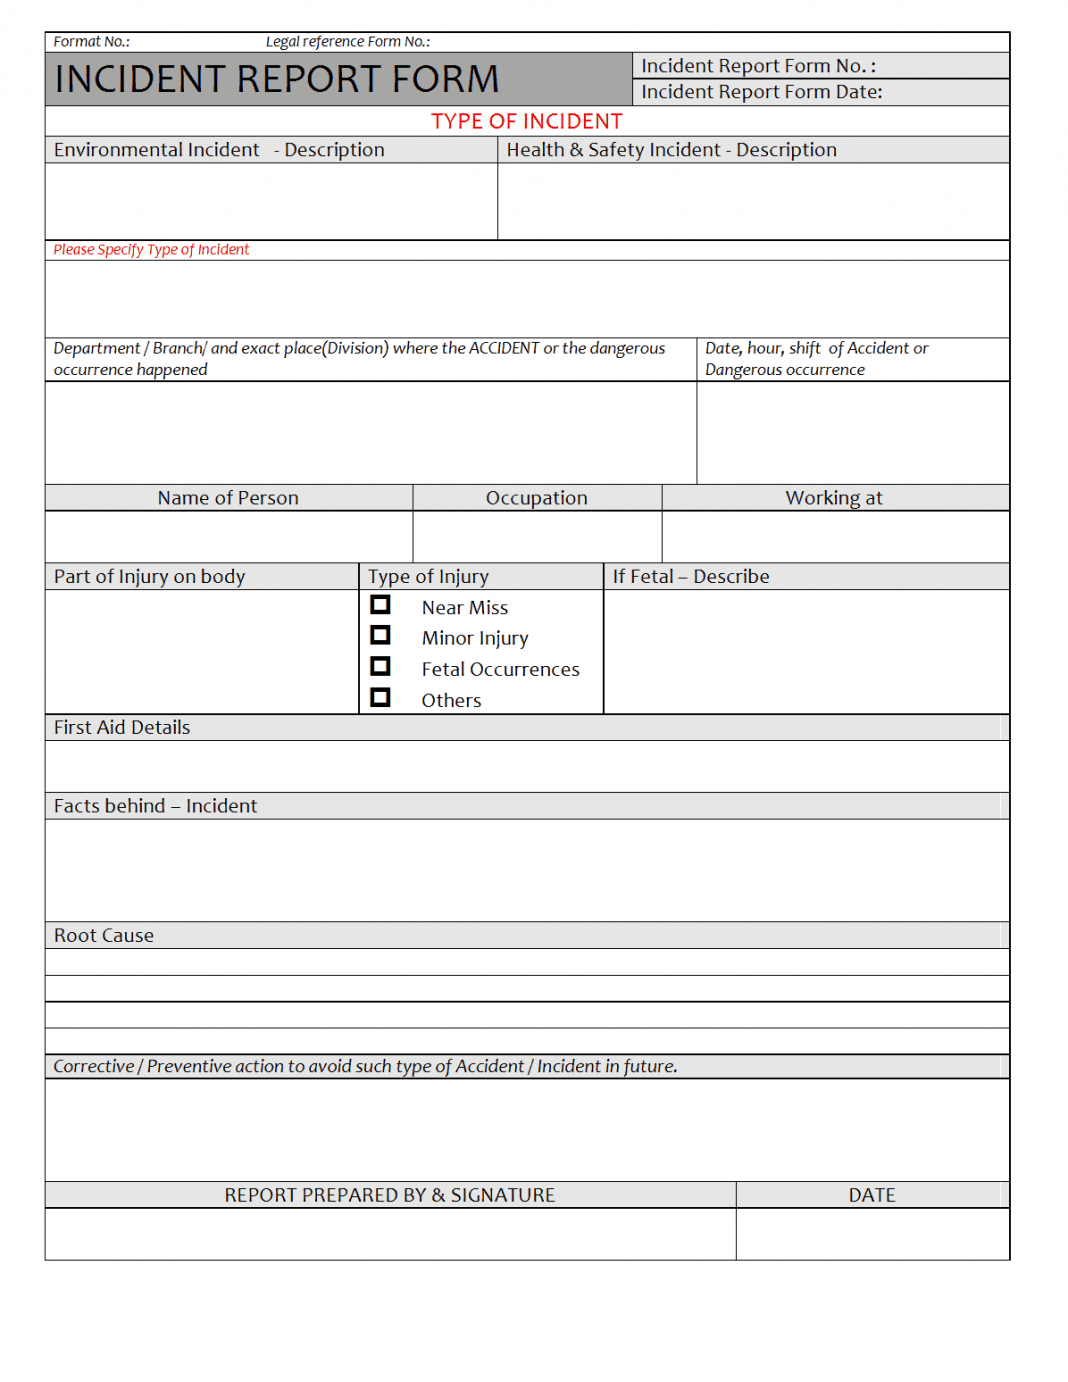 Sample Monthly Health And Safety Report Format Annual For Monthly Health And Safety Report Template